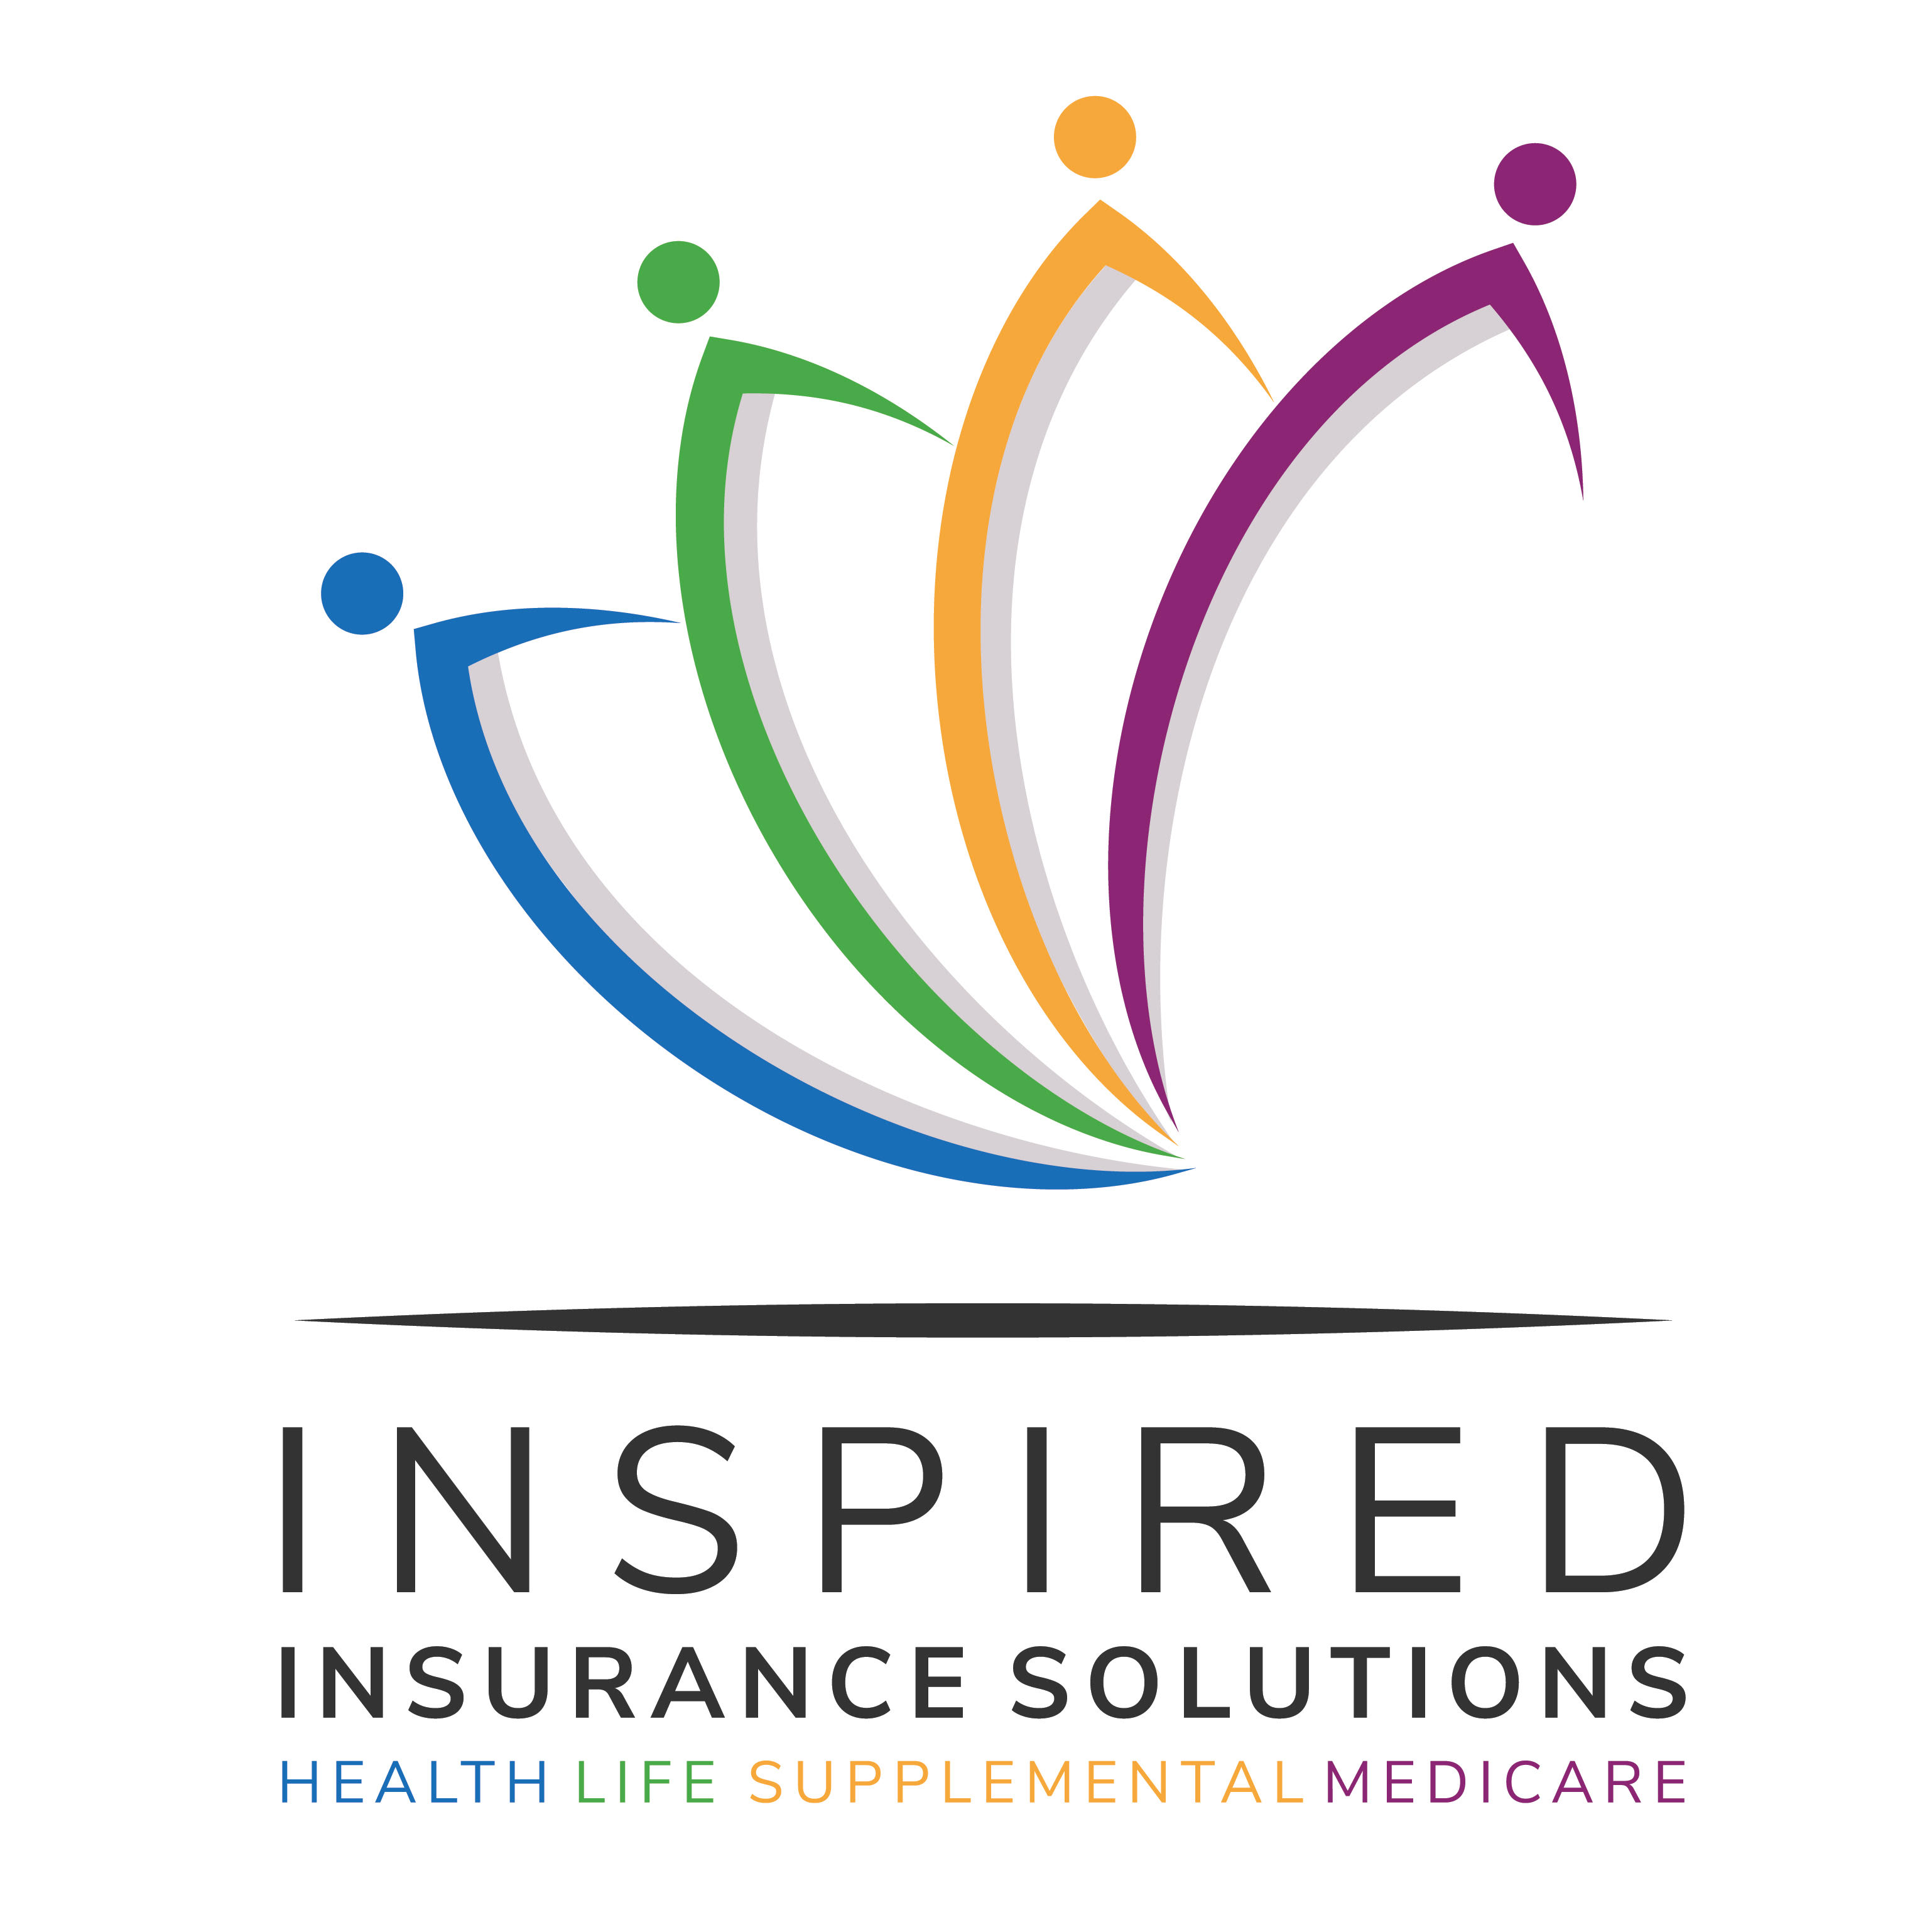 Inspired Insurance Solutions Named in Orlando Business Journal’s "Top 25 Women-Owned Businesses"